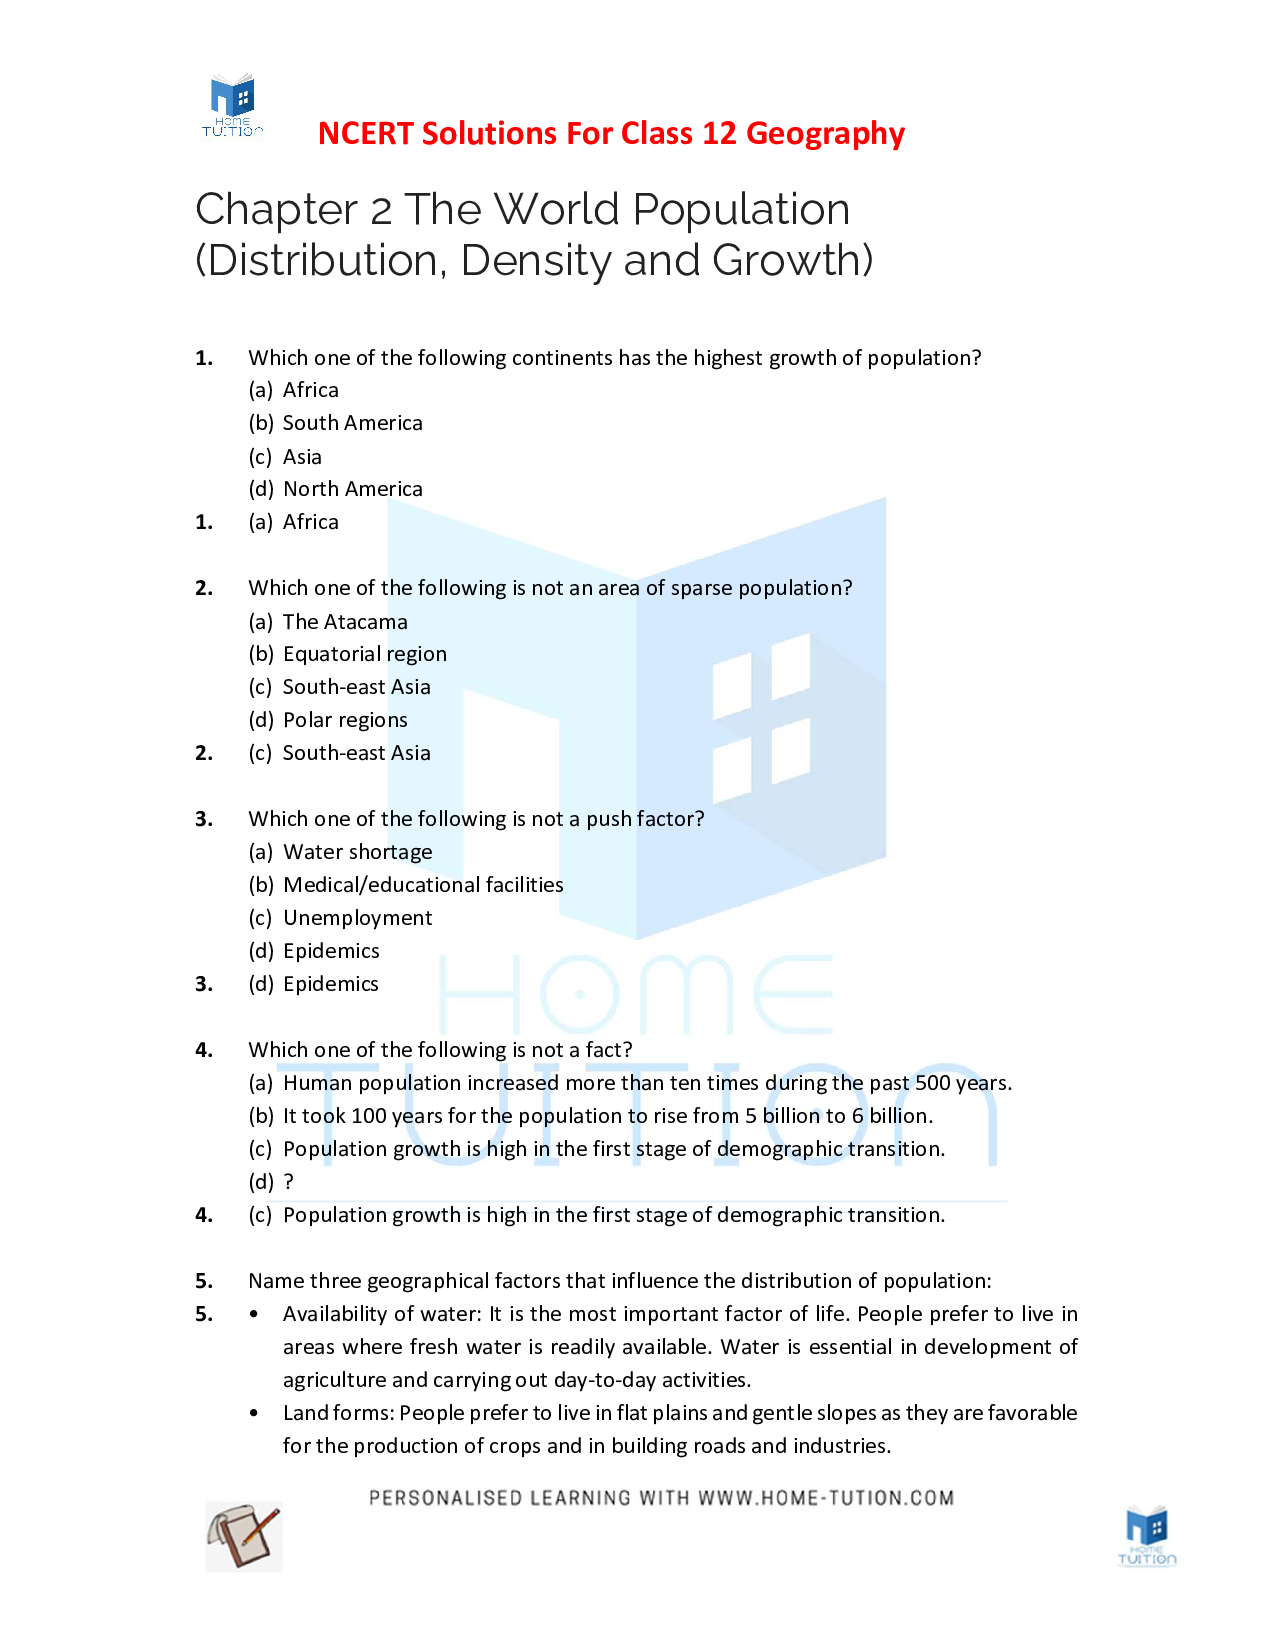 Chapter 2 The World Population (Distribution, Density, and Growth)